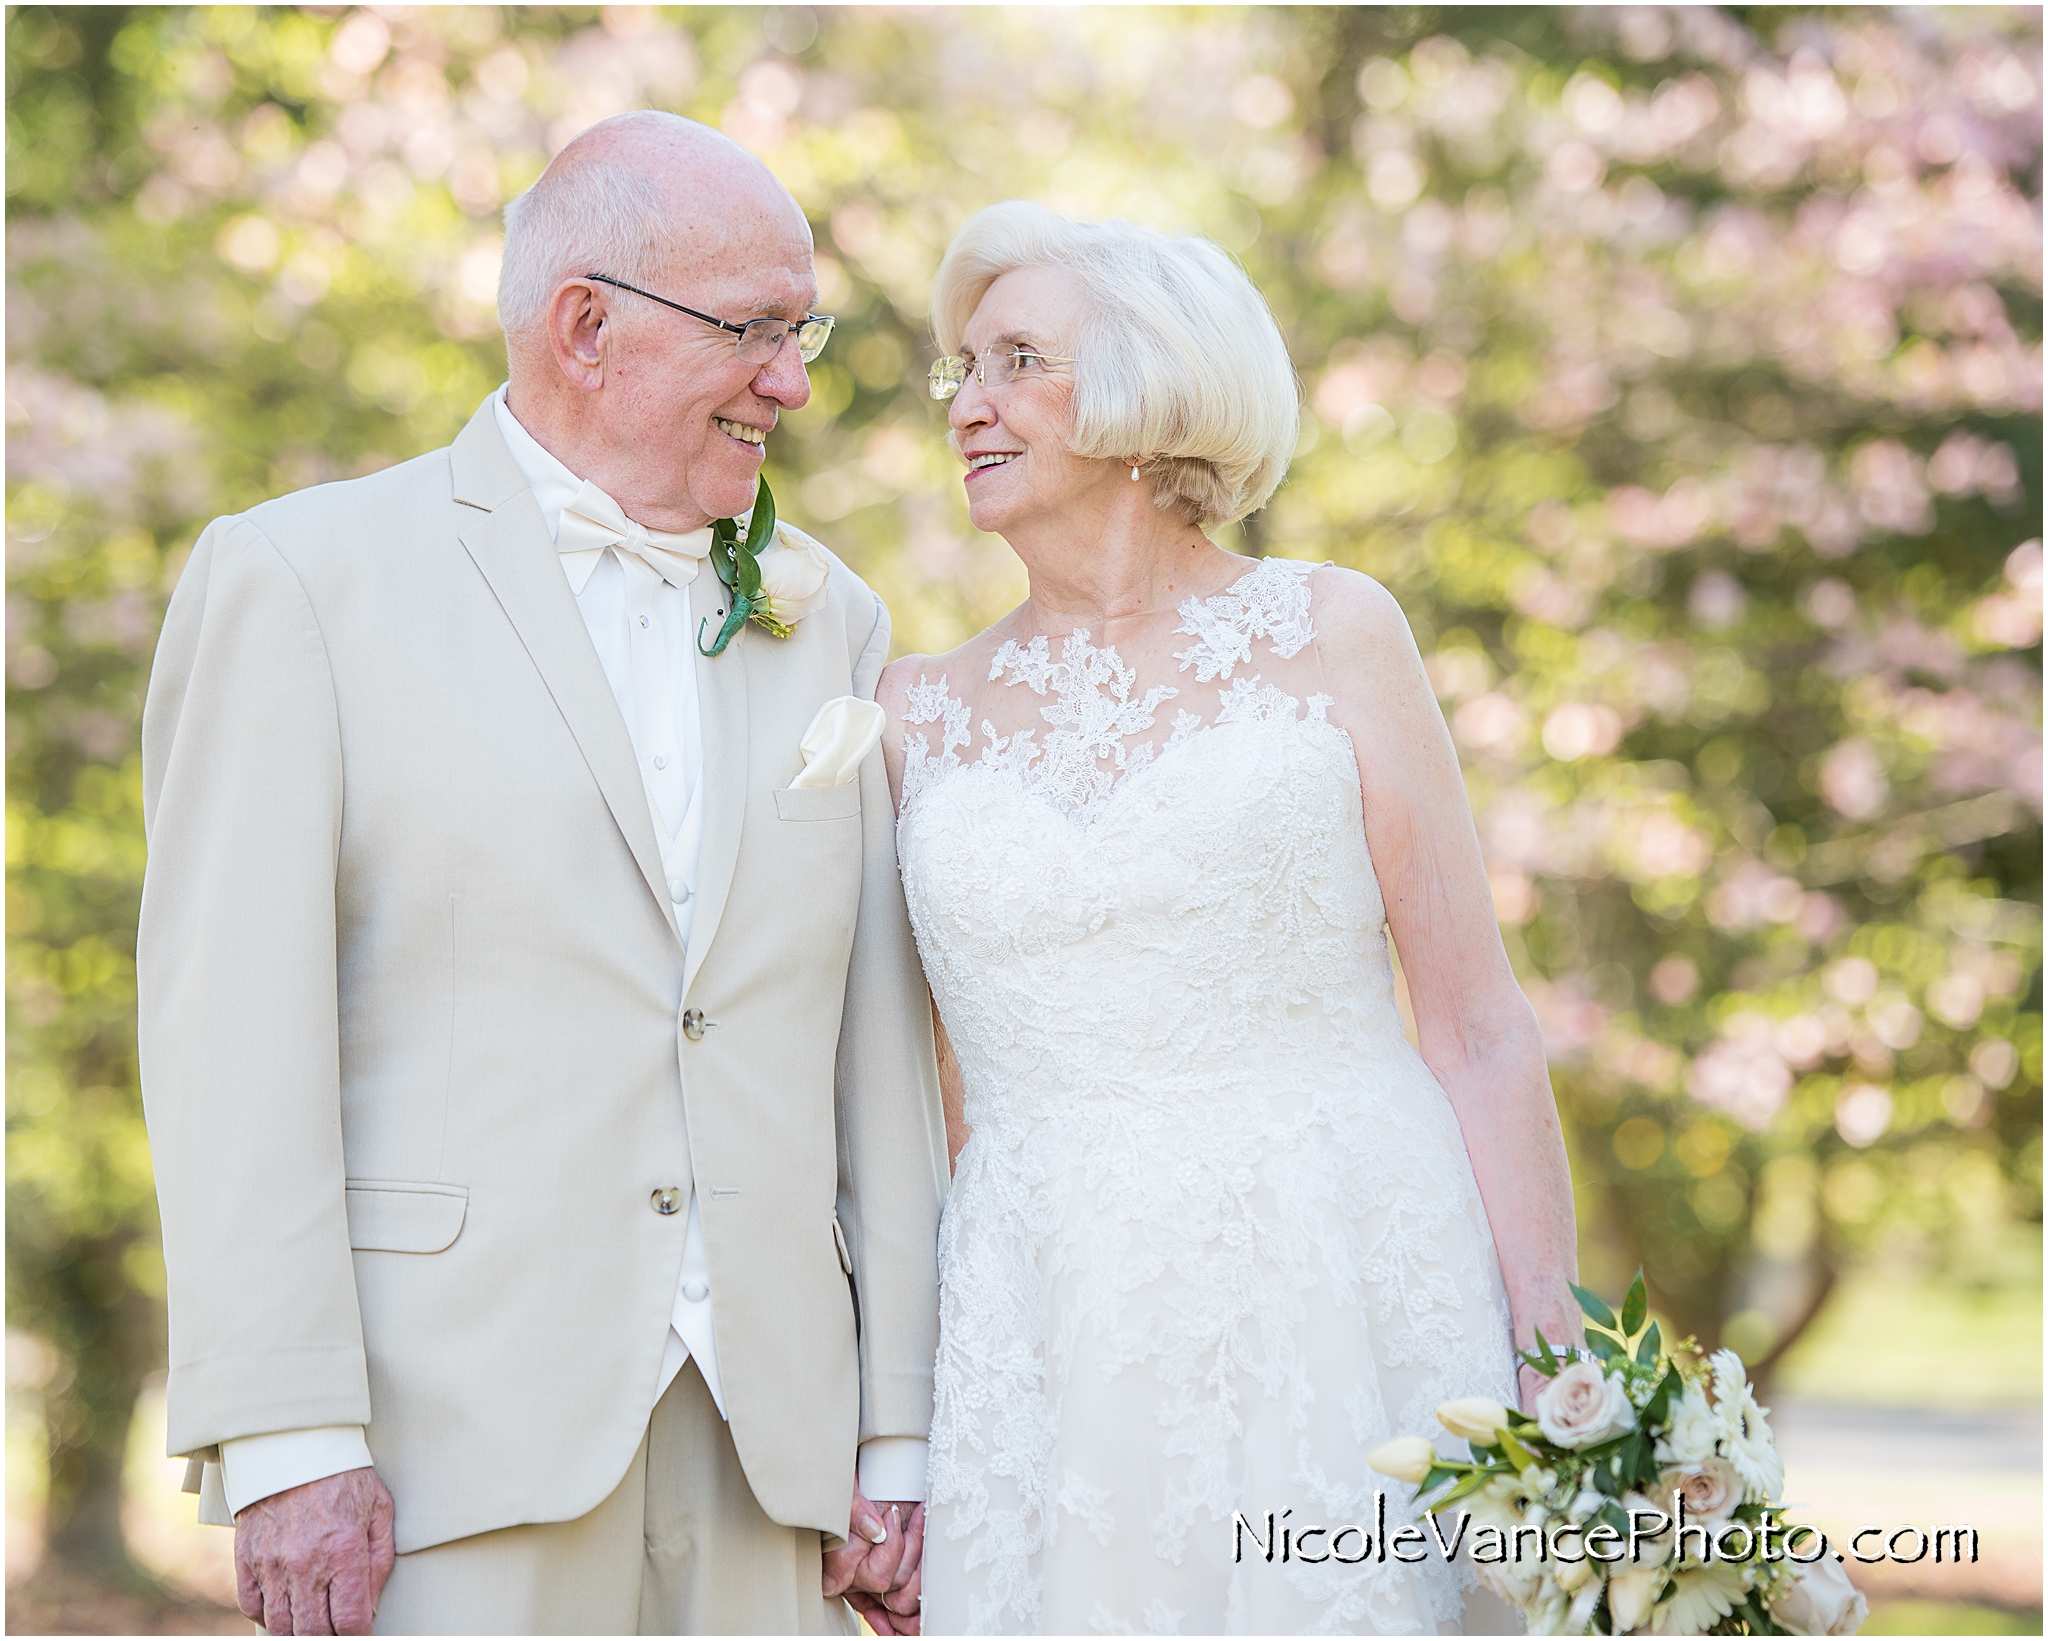 Bride and groom pose at Crestwood Presbyterian Church in Chesterfield VA